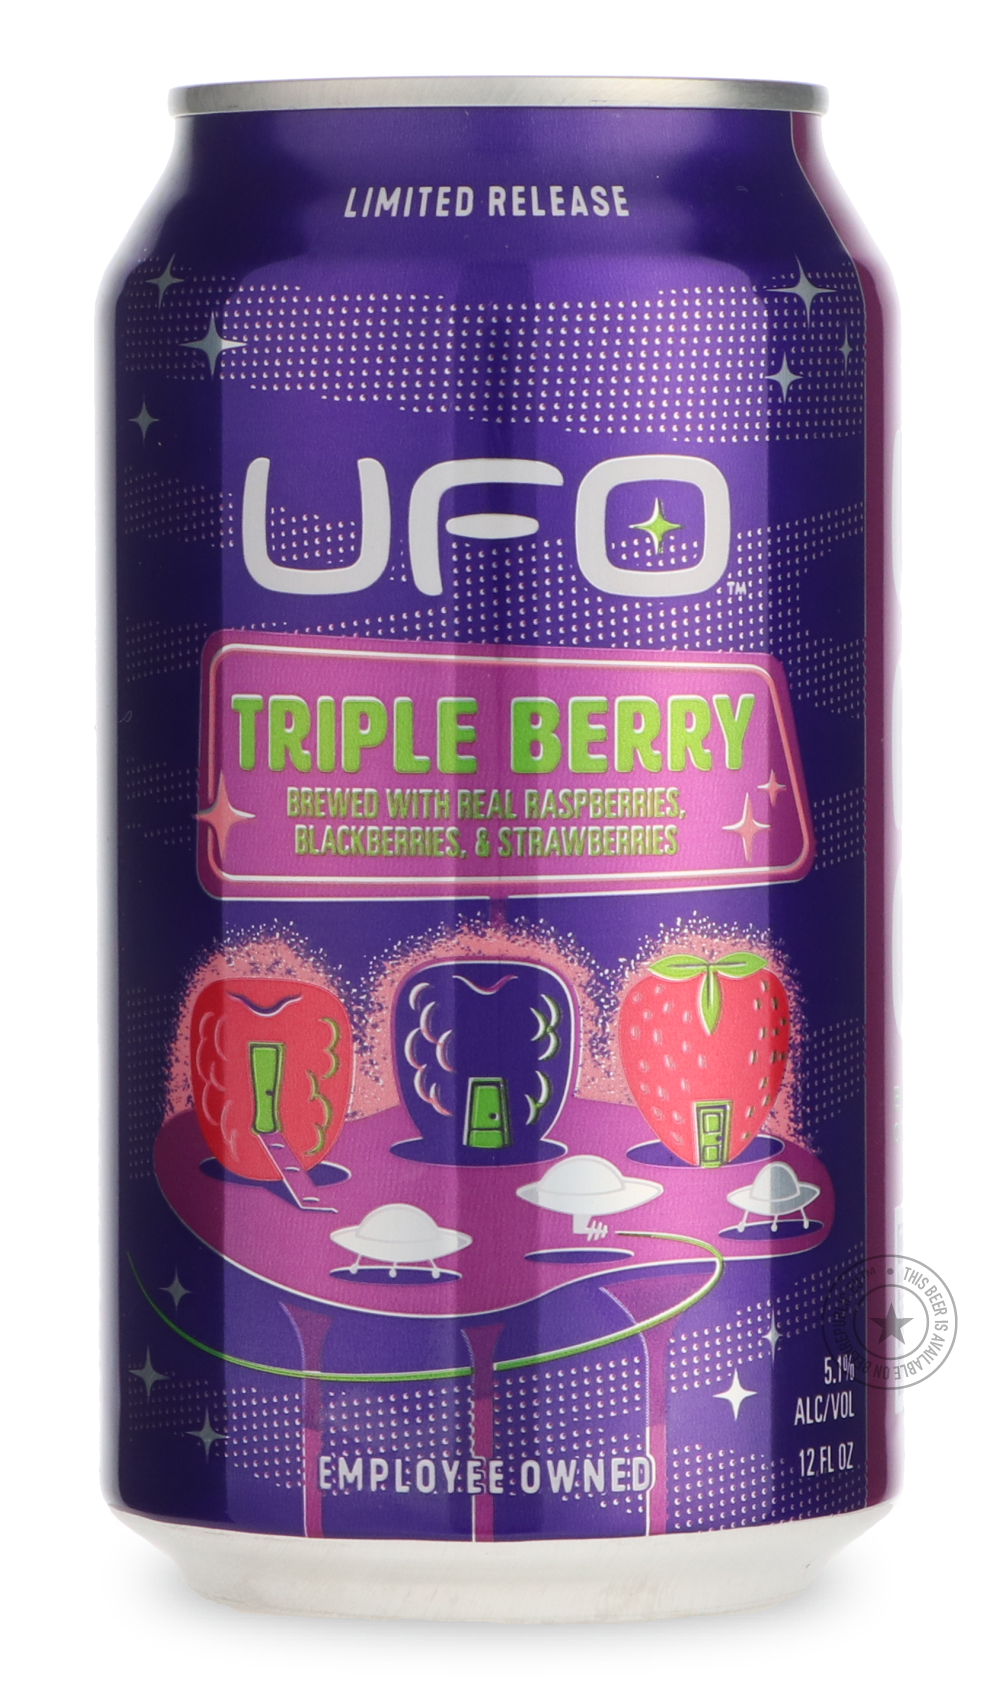 -Harpoon- UFO Triple Berry-Wit / Weizen / Wheat- Only @ Beer Republic - The best online beer store for American & Canadian craft beer - Buy beer online from the USA and Canada - Bier online kopen - Amerikaans bier kopen - Craft beer store - Craft beer kopen - Amerikanisch bier kaufen - Bier online kaufen - Acheter biere online - IPA - Stout - Porter - New England IPA - Hazy IPA - Imperial Stout - Barrel Aged - Barrel Aged Imperial Stout - Brown - Dark beer - Blond - Blonde - Pilsner - Lager - Wheat - Weizen